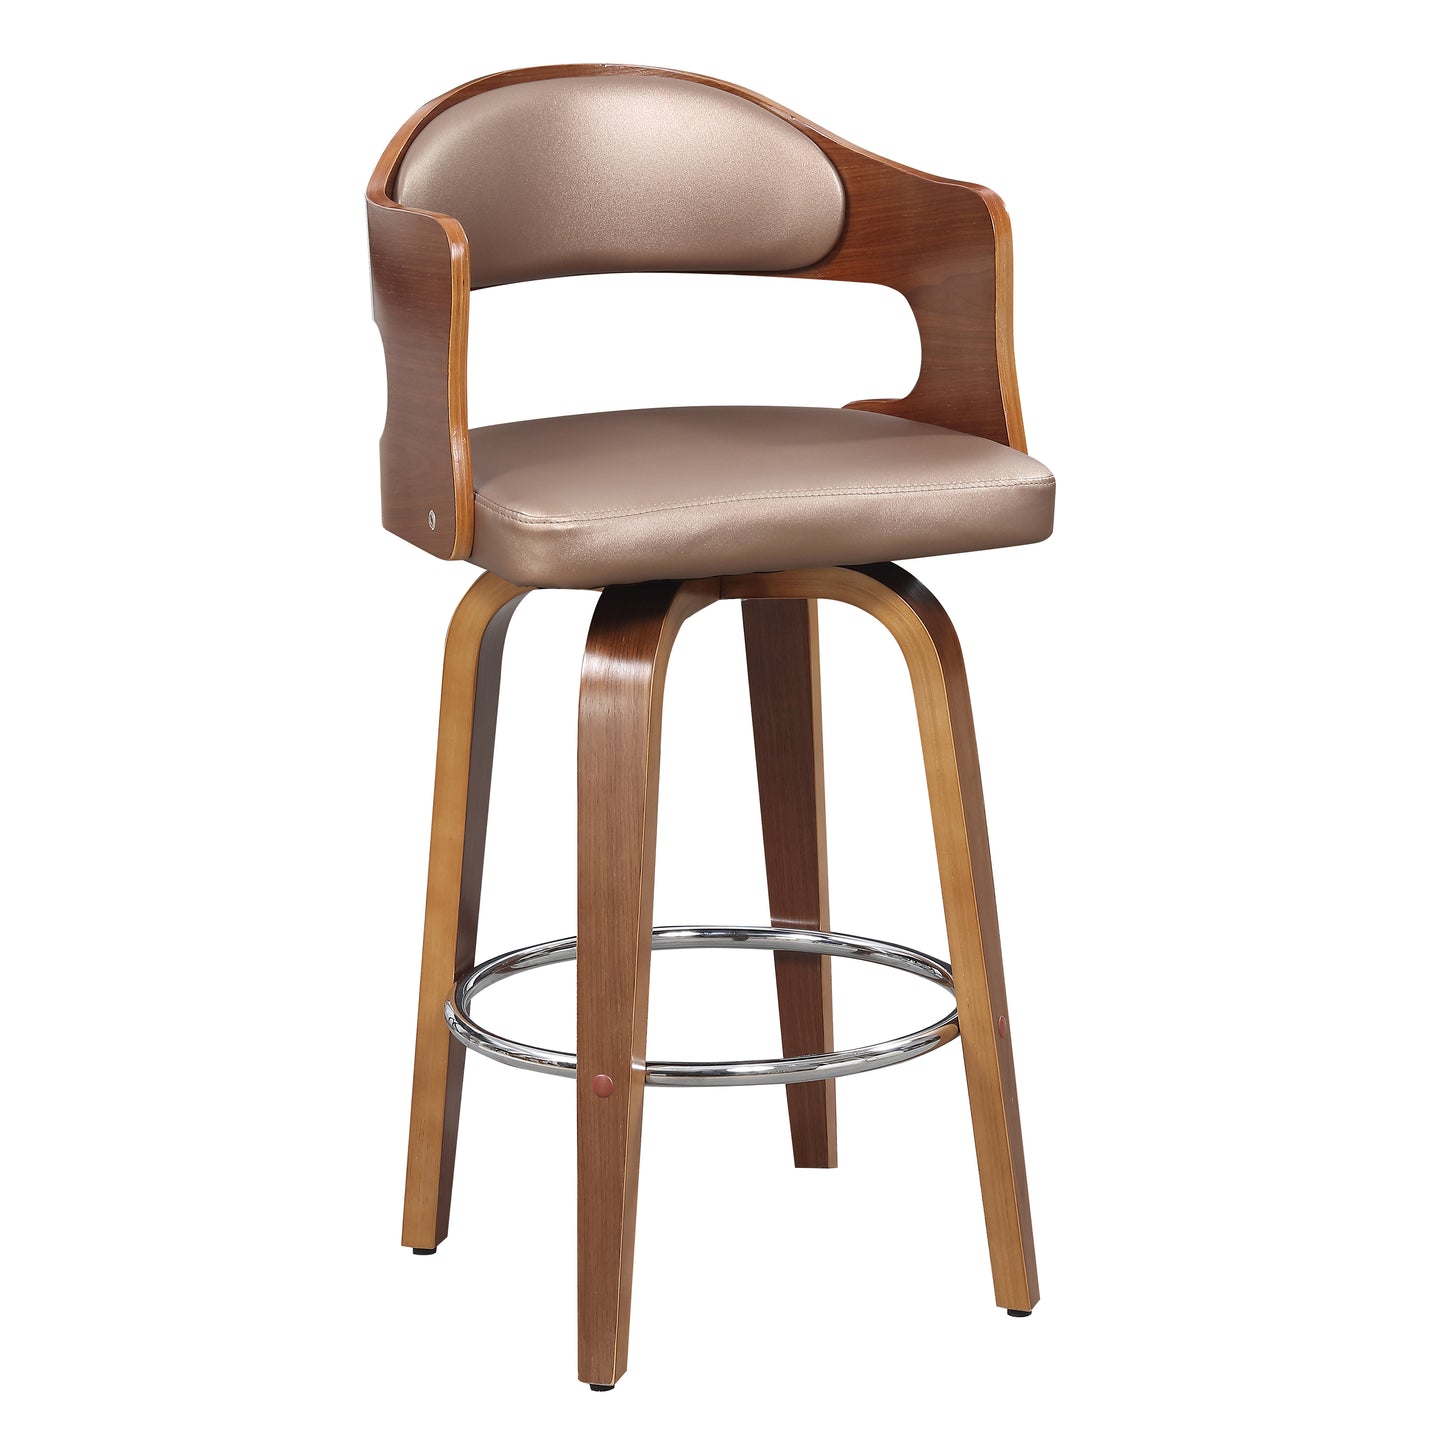 ACBS09 Wood And Faux Leather Swivel Barstool